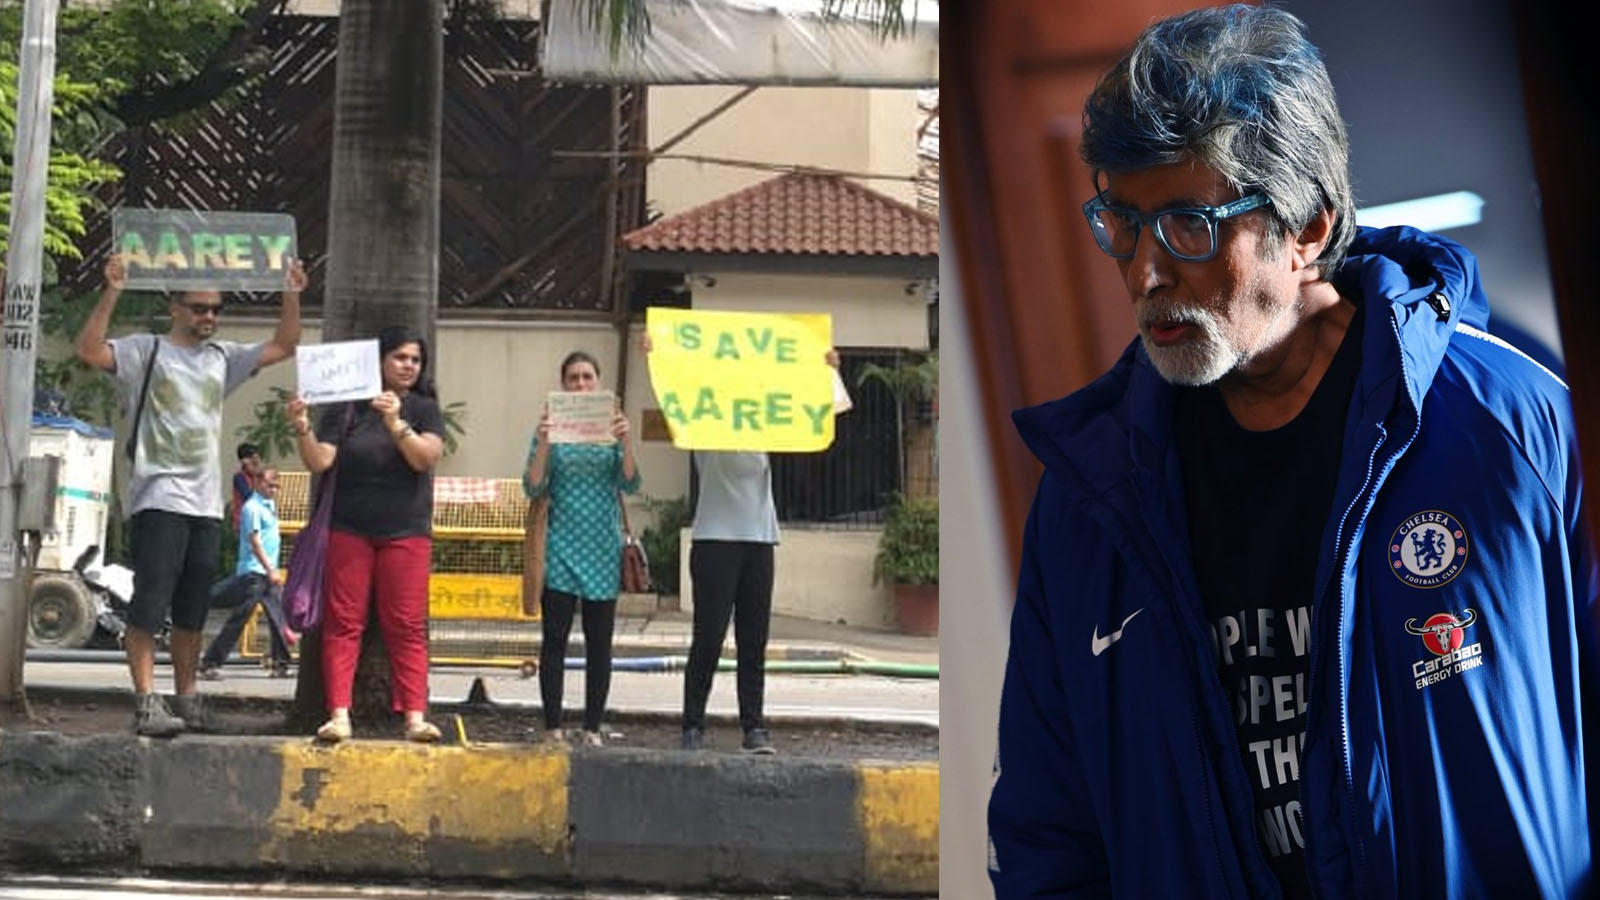 Activists under police custody for Save Aarey protest outside Bachchan’s house